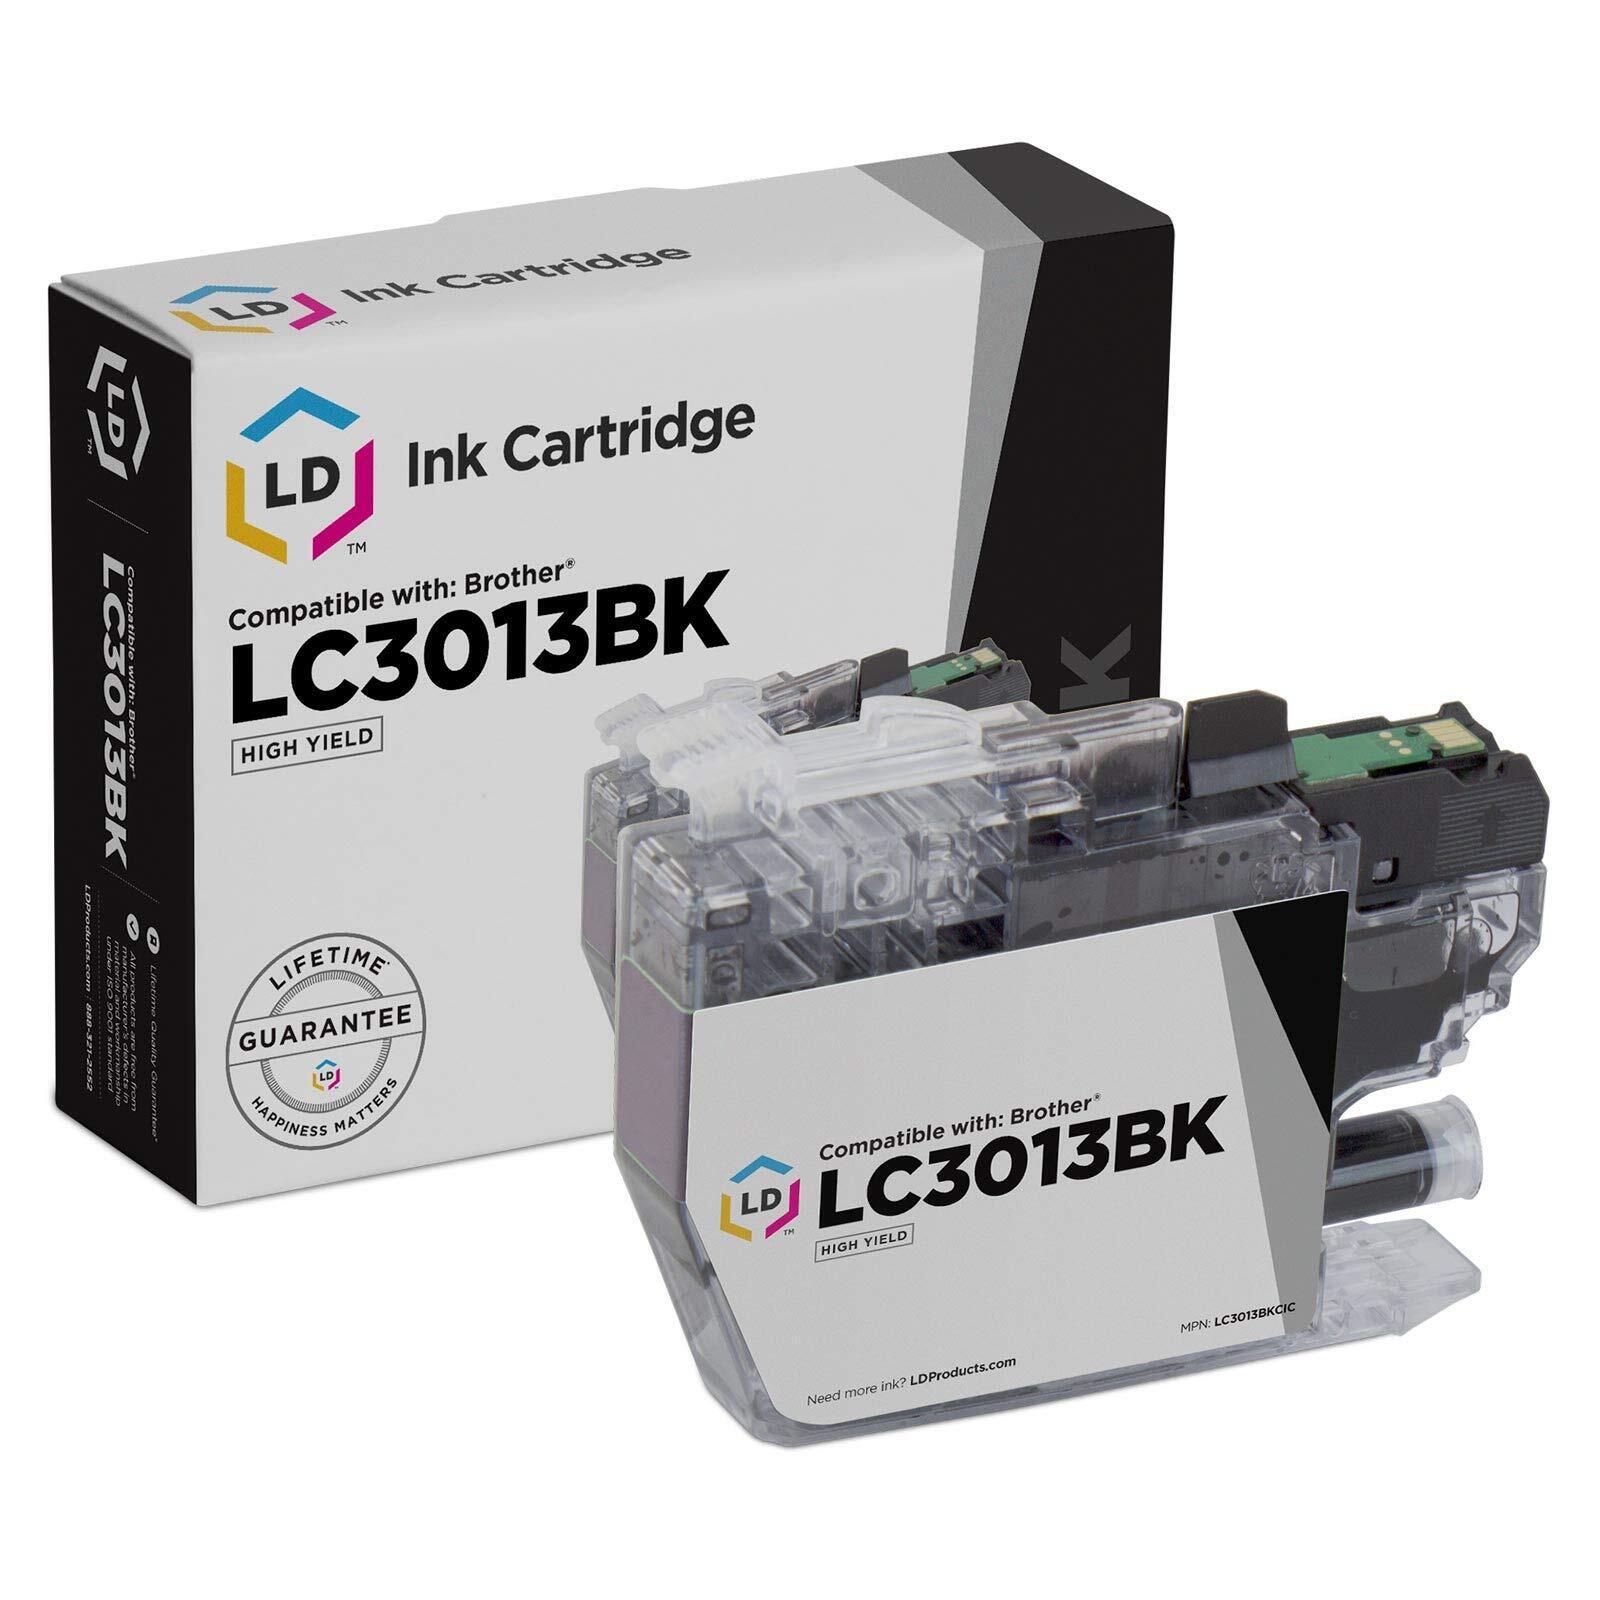 LD Compatible Replacement for Brother LC3013 / LC3013BK High Yield Black Ink